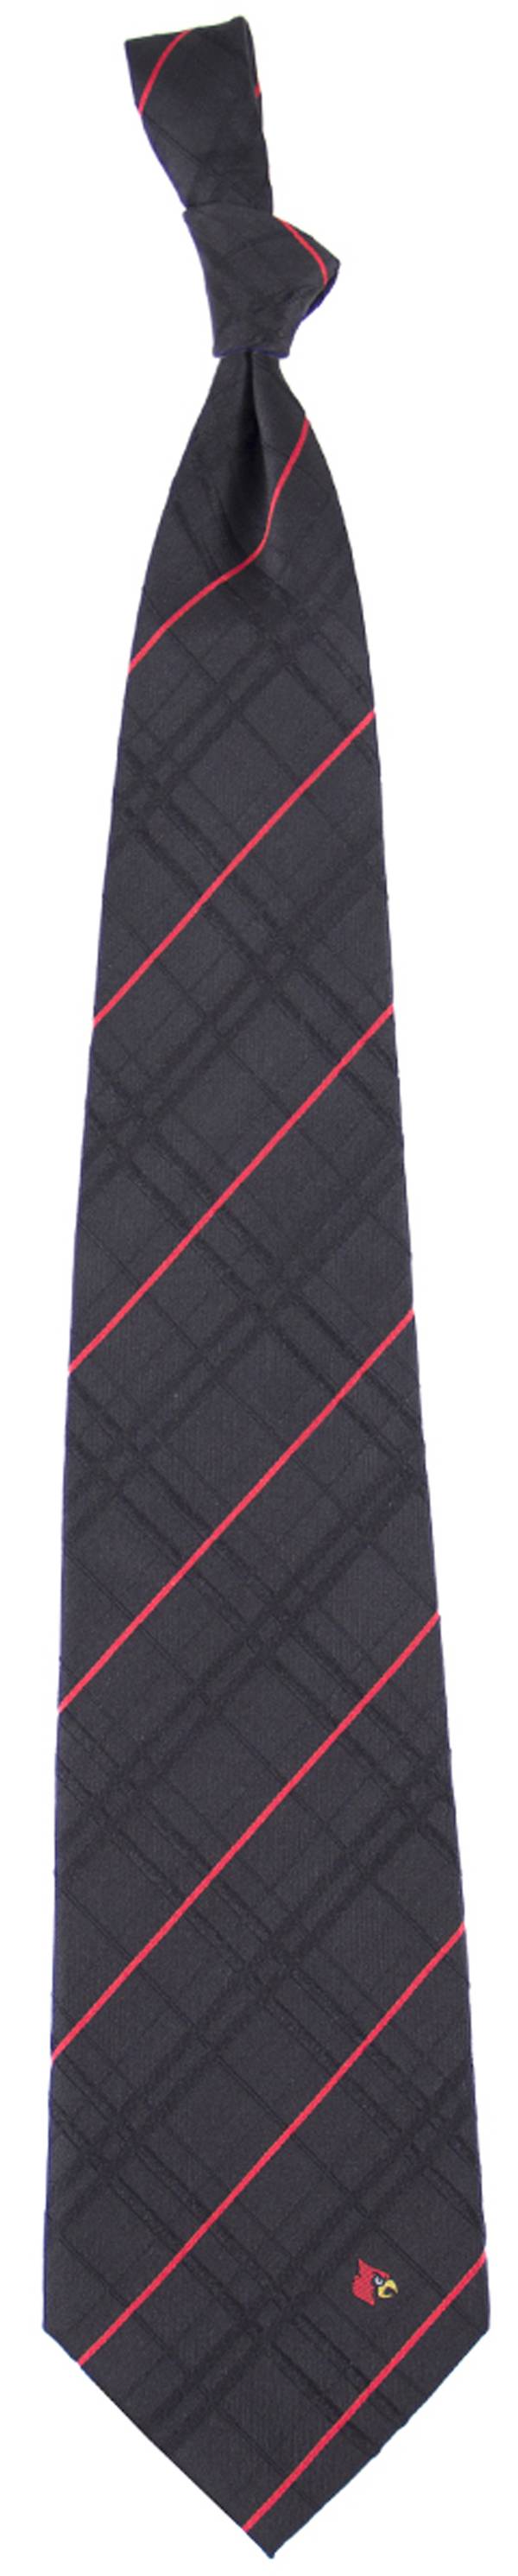 Eagles Wings Louisville Cardinals Woven Oxford Necktie product image